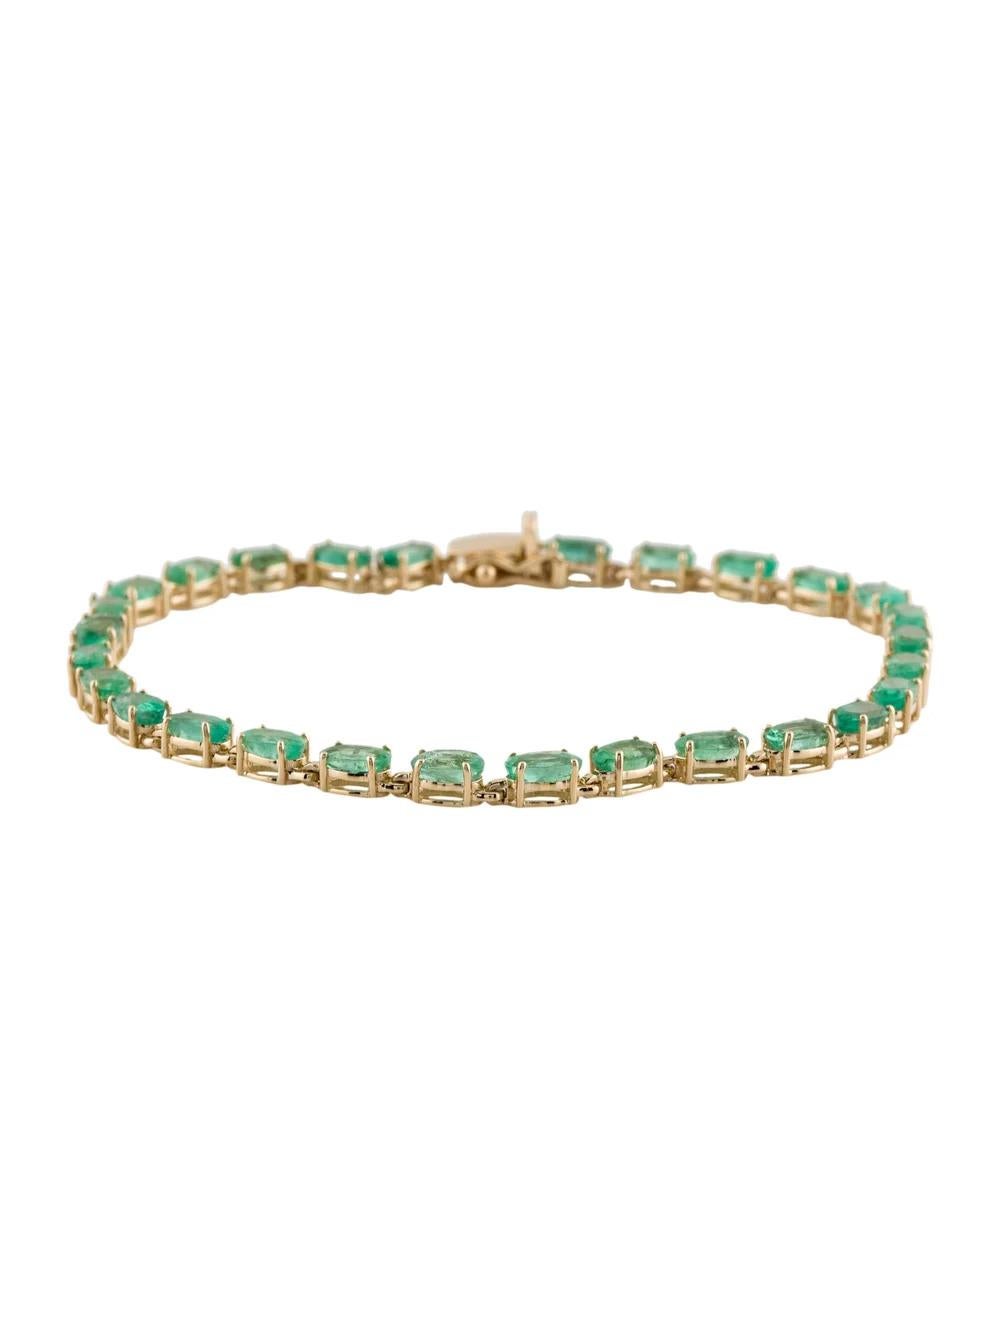 Experience timeless elegance with this exquisite 14K Yellow Gold Emerald Link Bracelet, a captivating addition to any jewelry collection. Crafted with meticulous attention to detail, this bracelet exudes luxury and